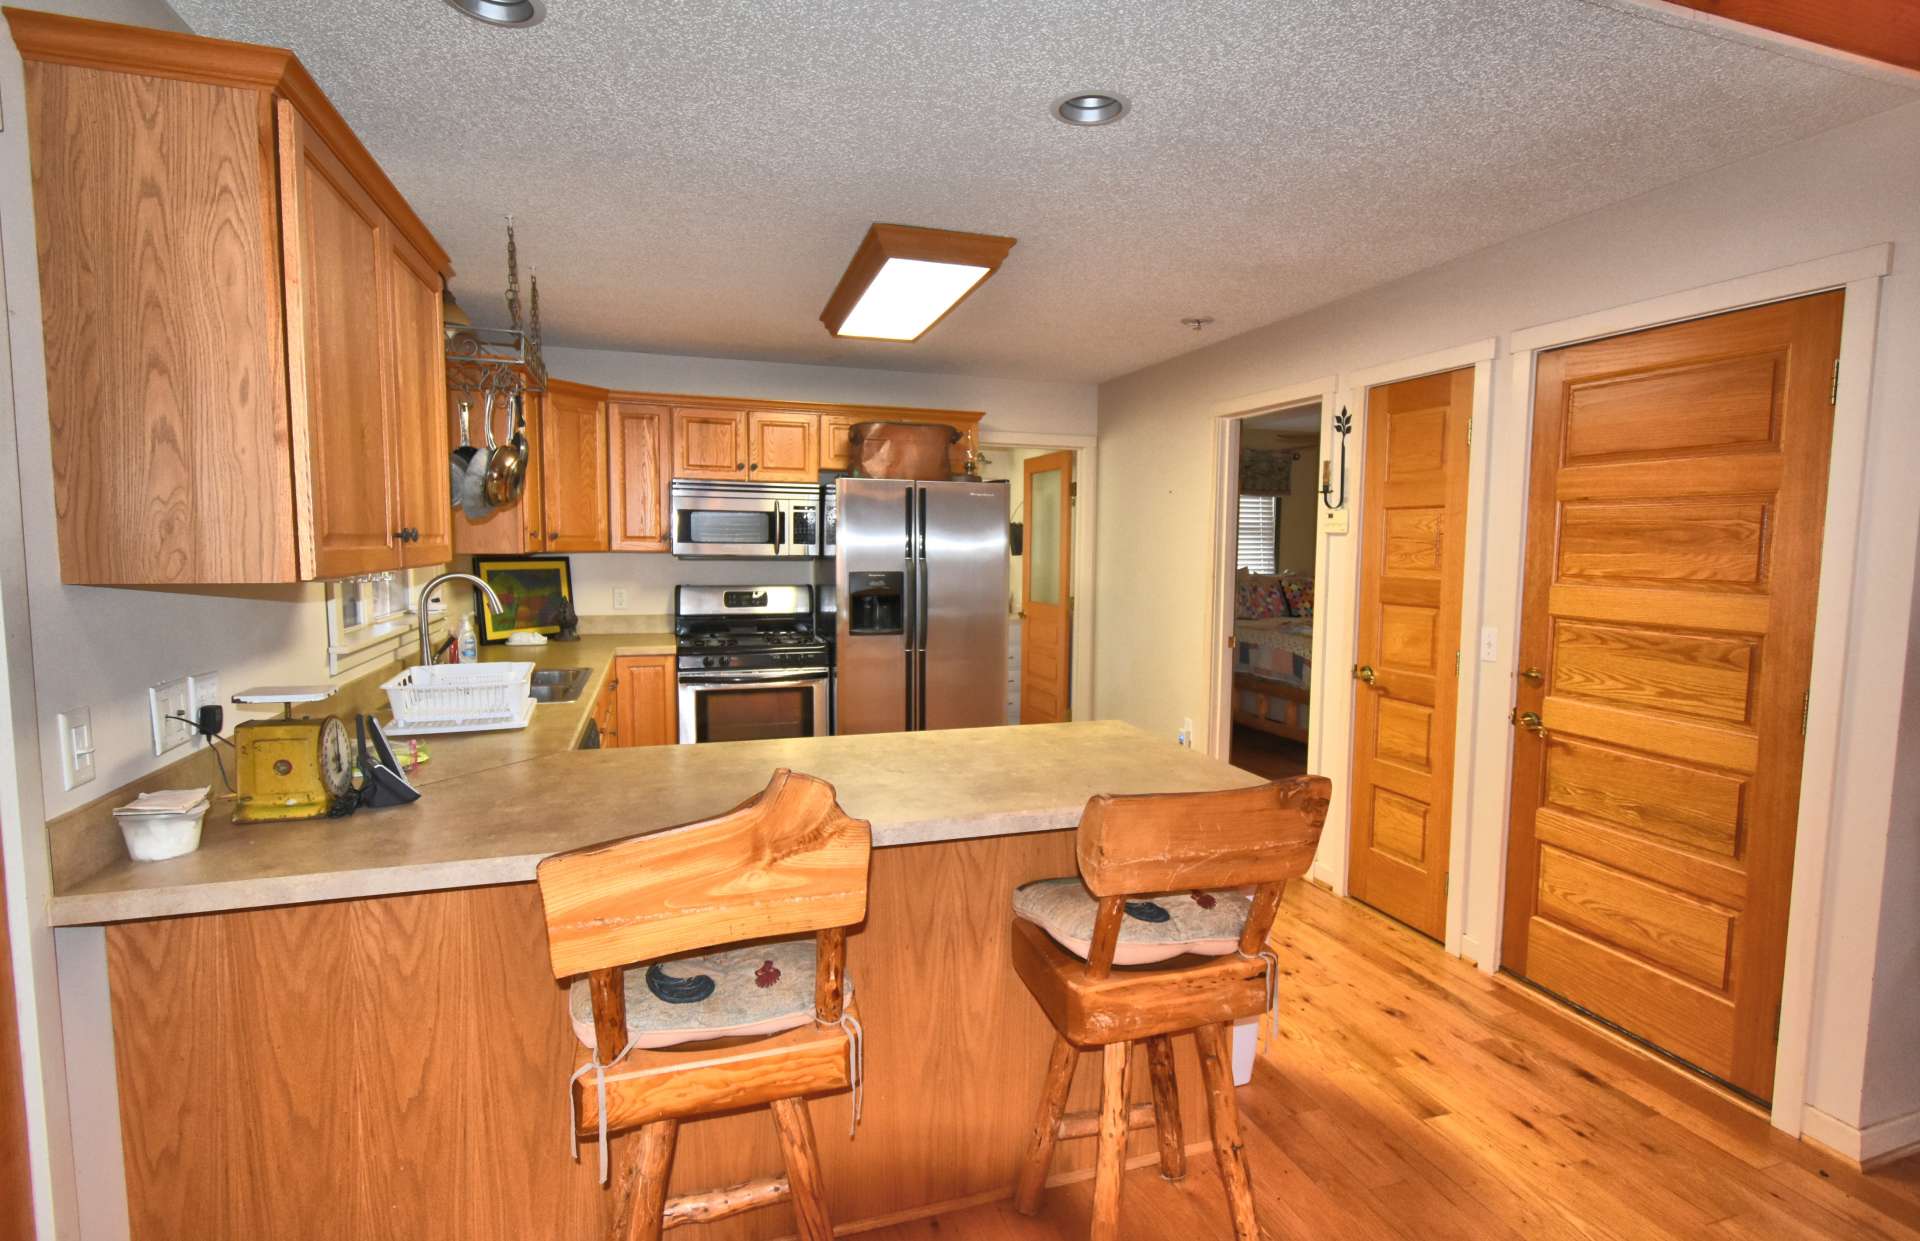 The kitchen features custom cabinets, stainless appliances, an informal eating area and more than ample work and storage space.